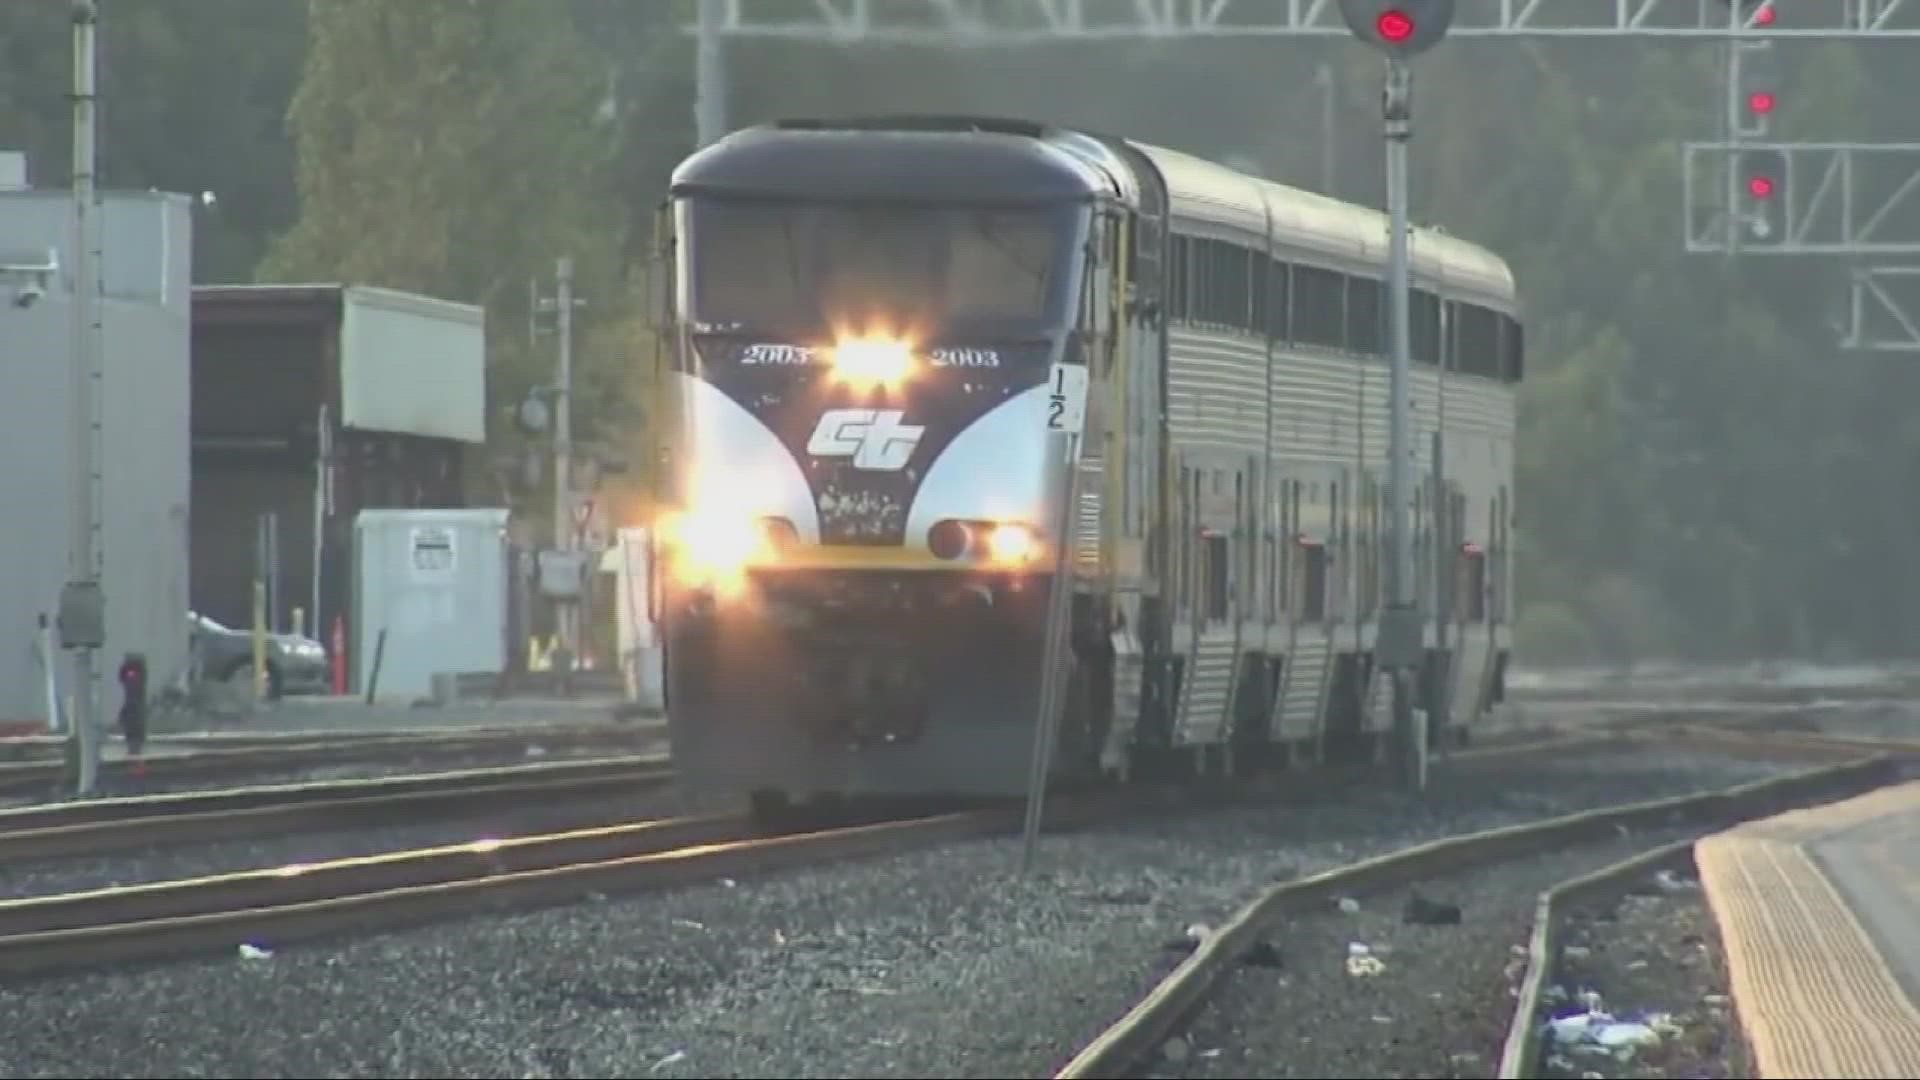 Metrolink and Amtrak are bracing for potential large-scale disruptions in service because of a potential nationwide rail strike that could begin as soon as Friday.